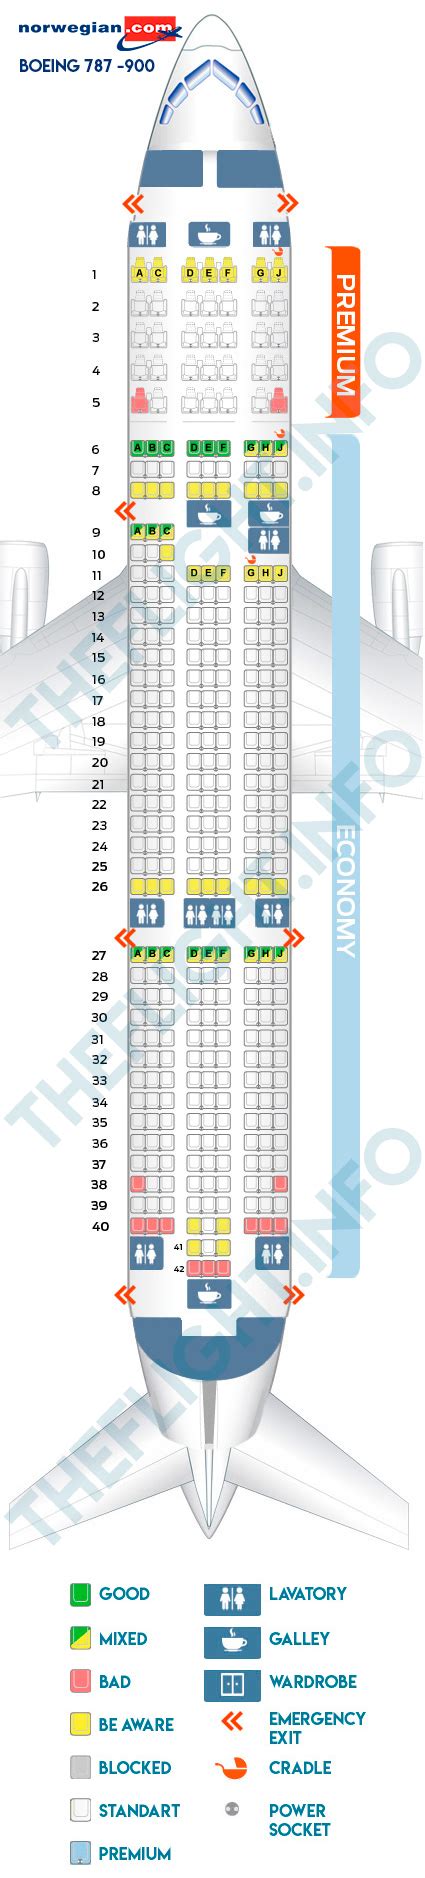 Aa 787 9 Seat Map Maps For You